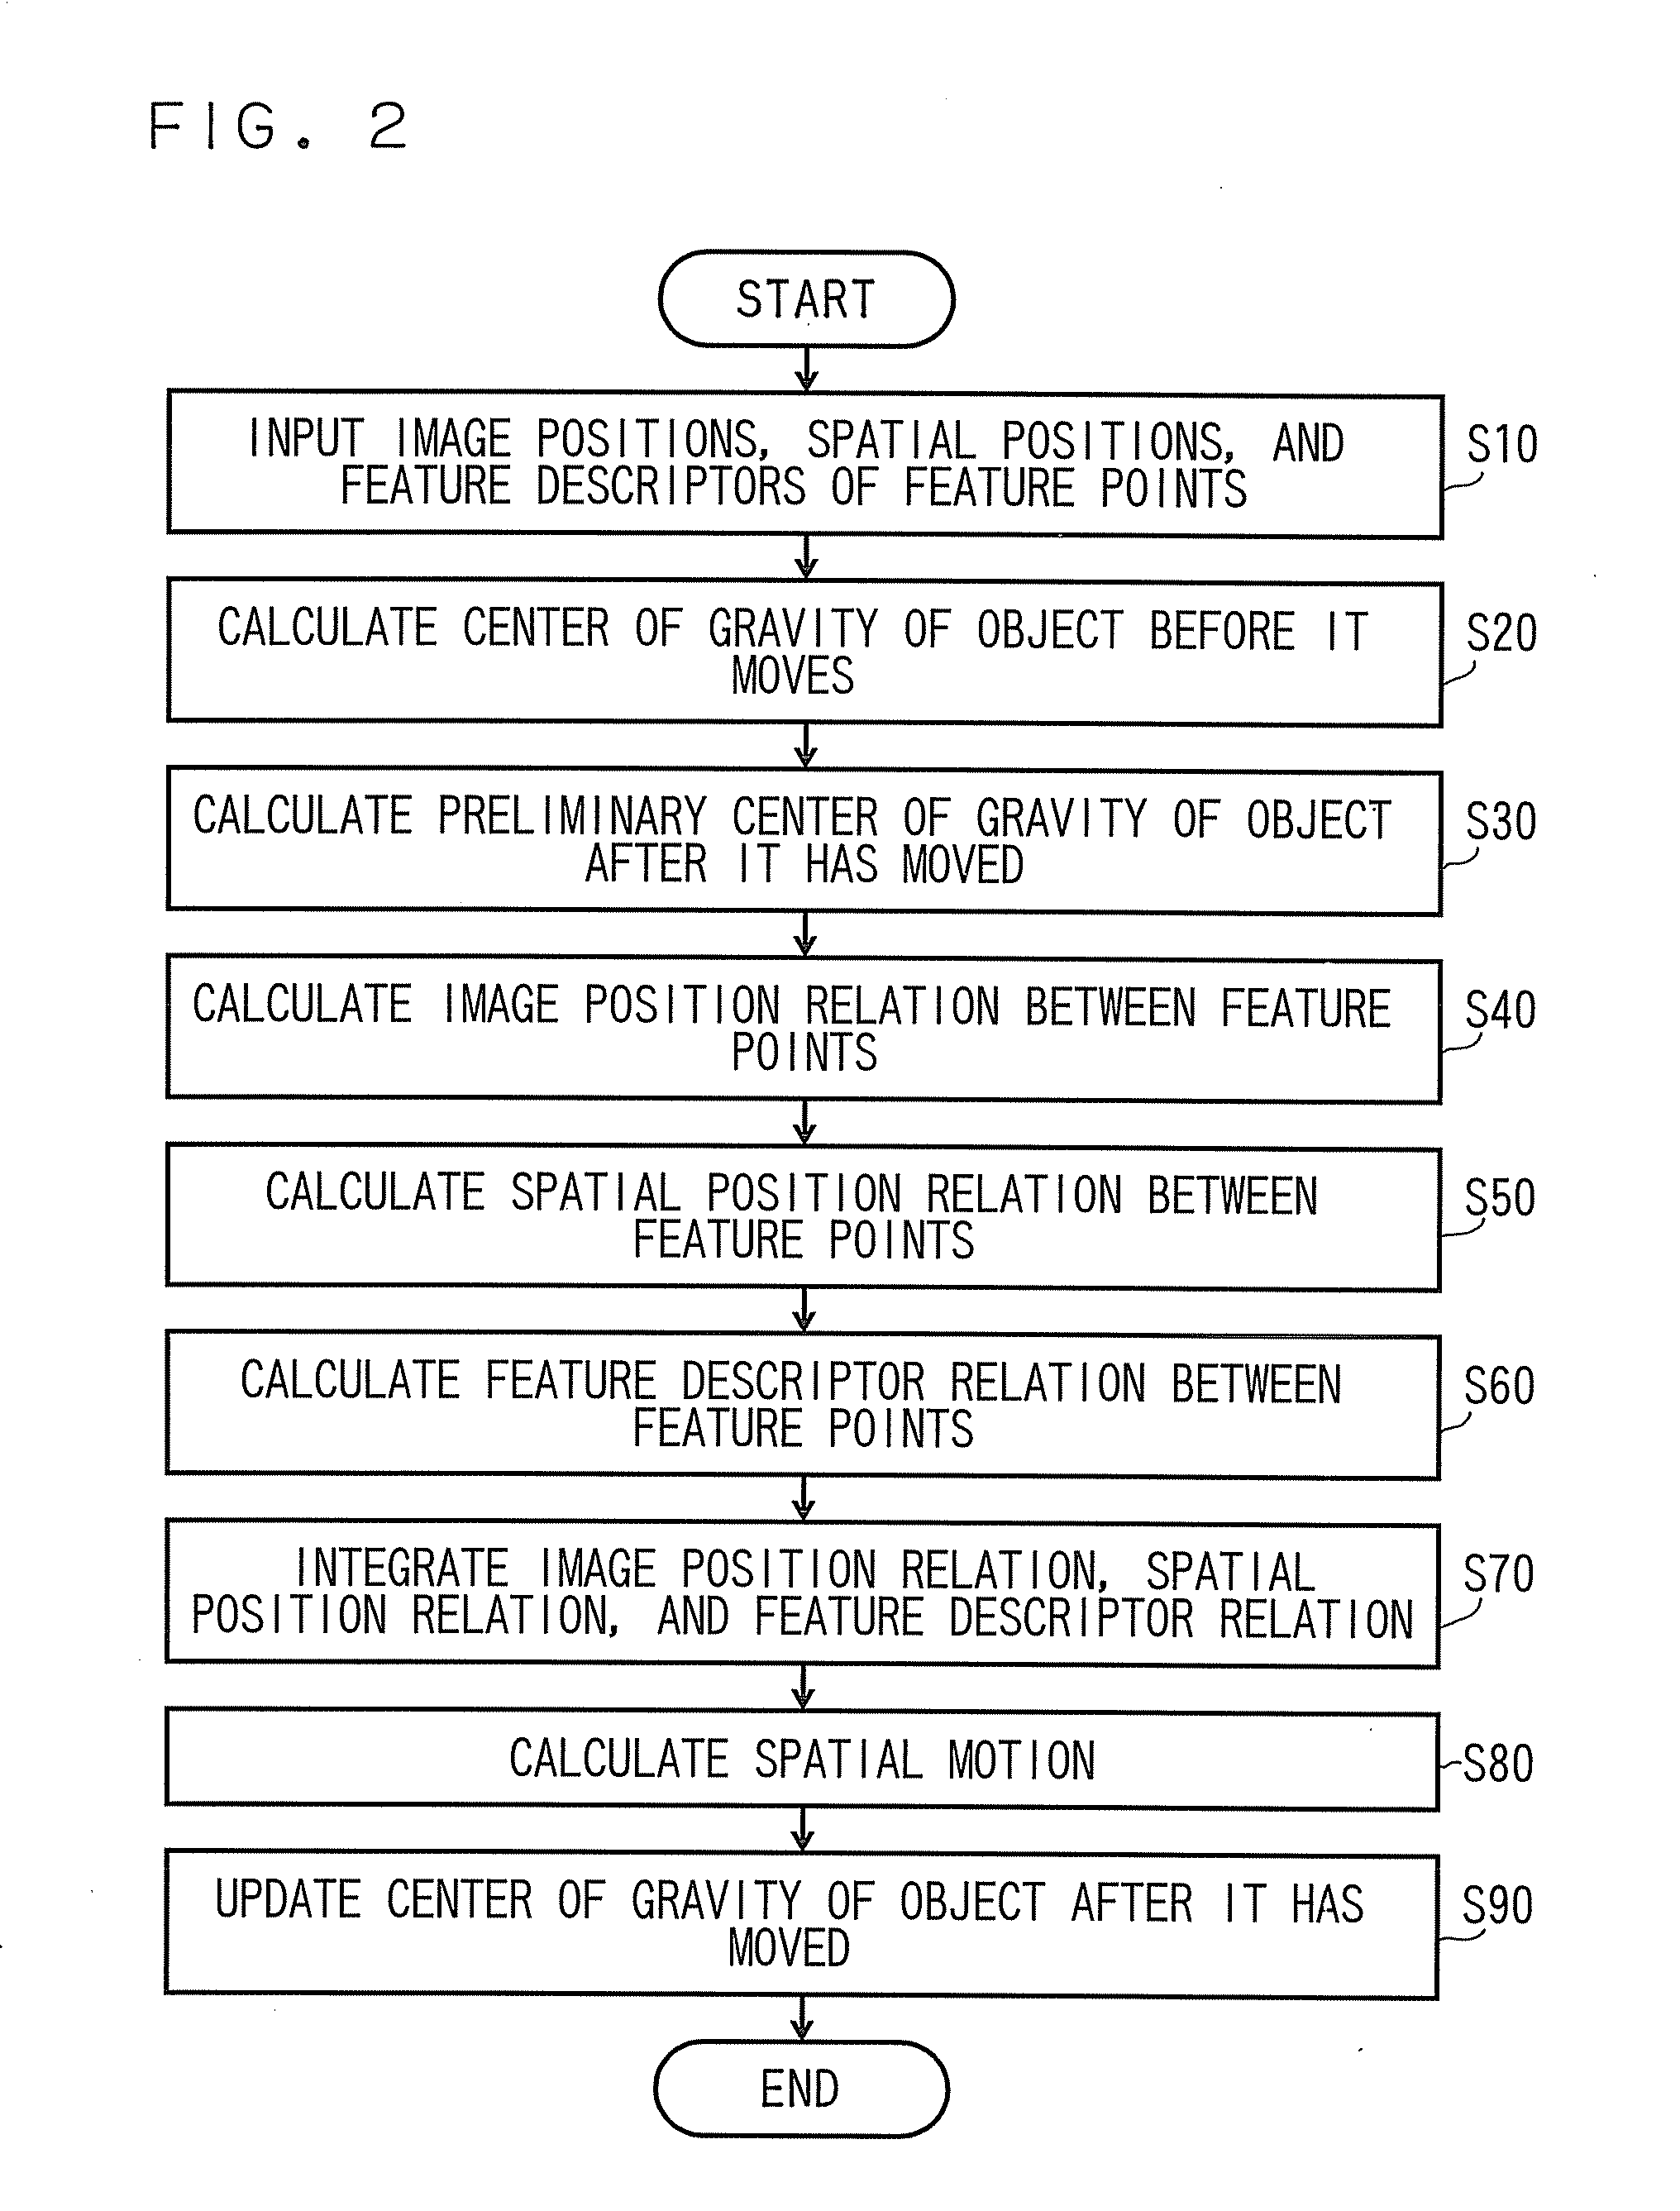 Spatial motion calculation apparatus and method for the same